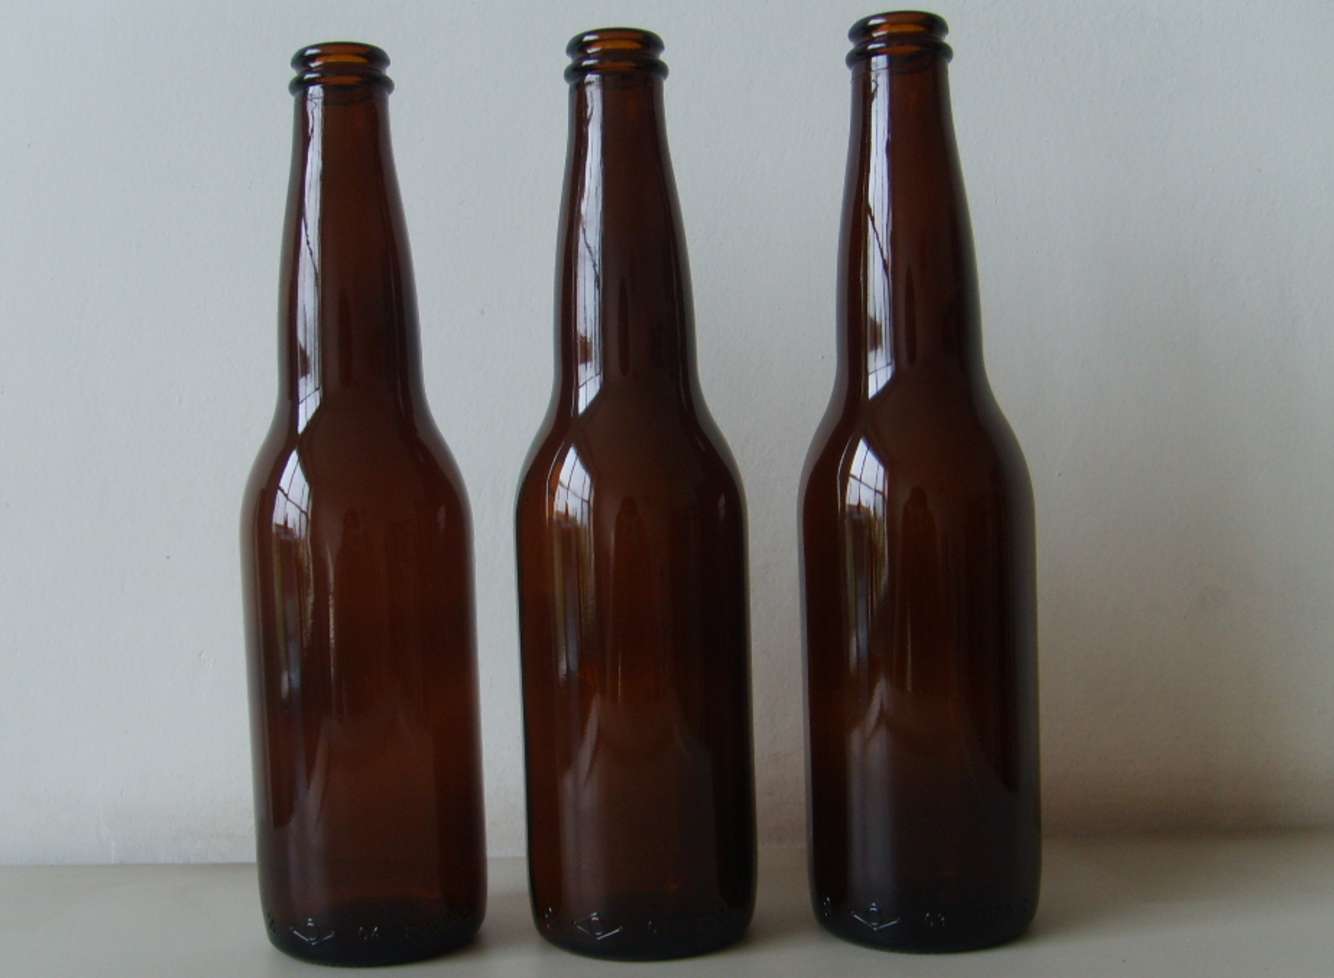 33cl 330ml Amber Beer Glass Bottle With Crown Cap